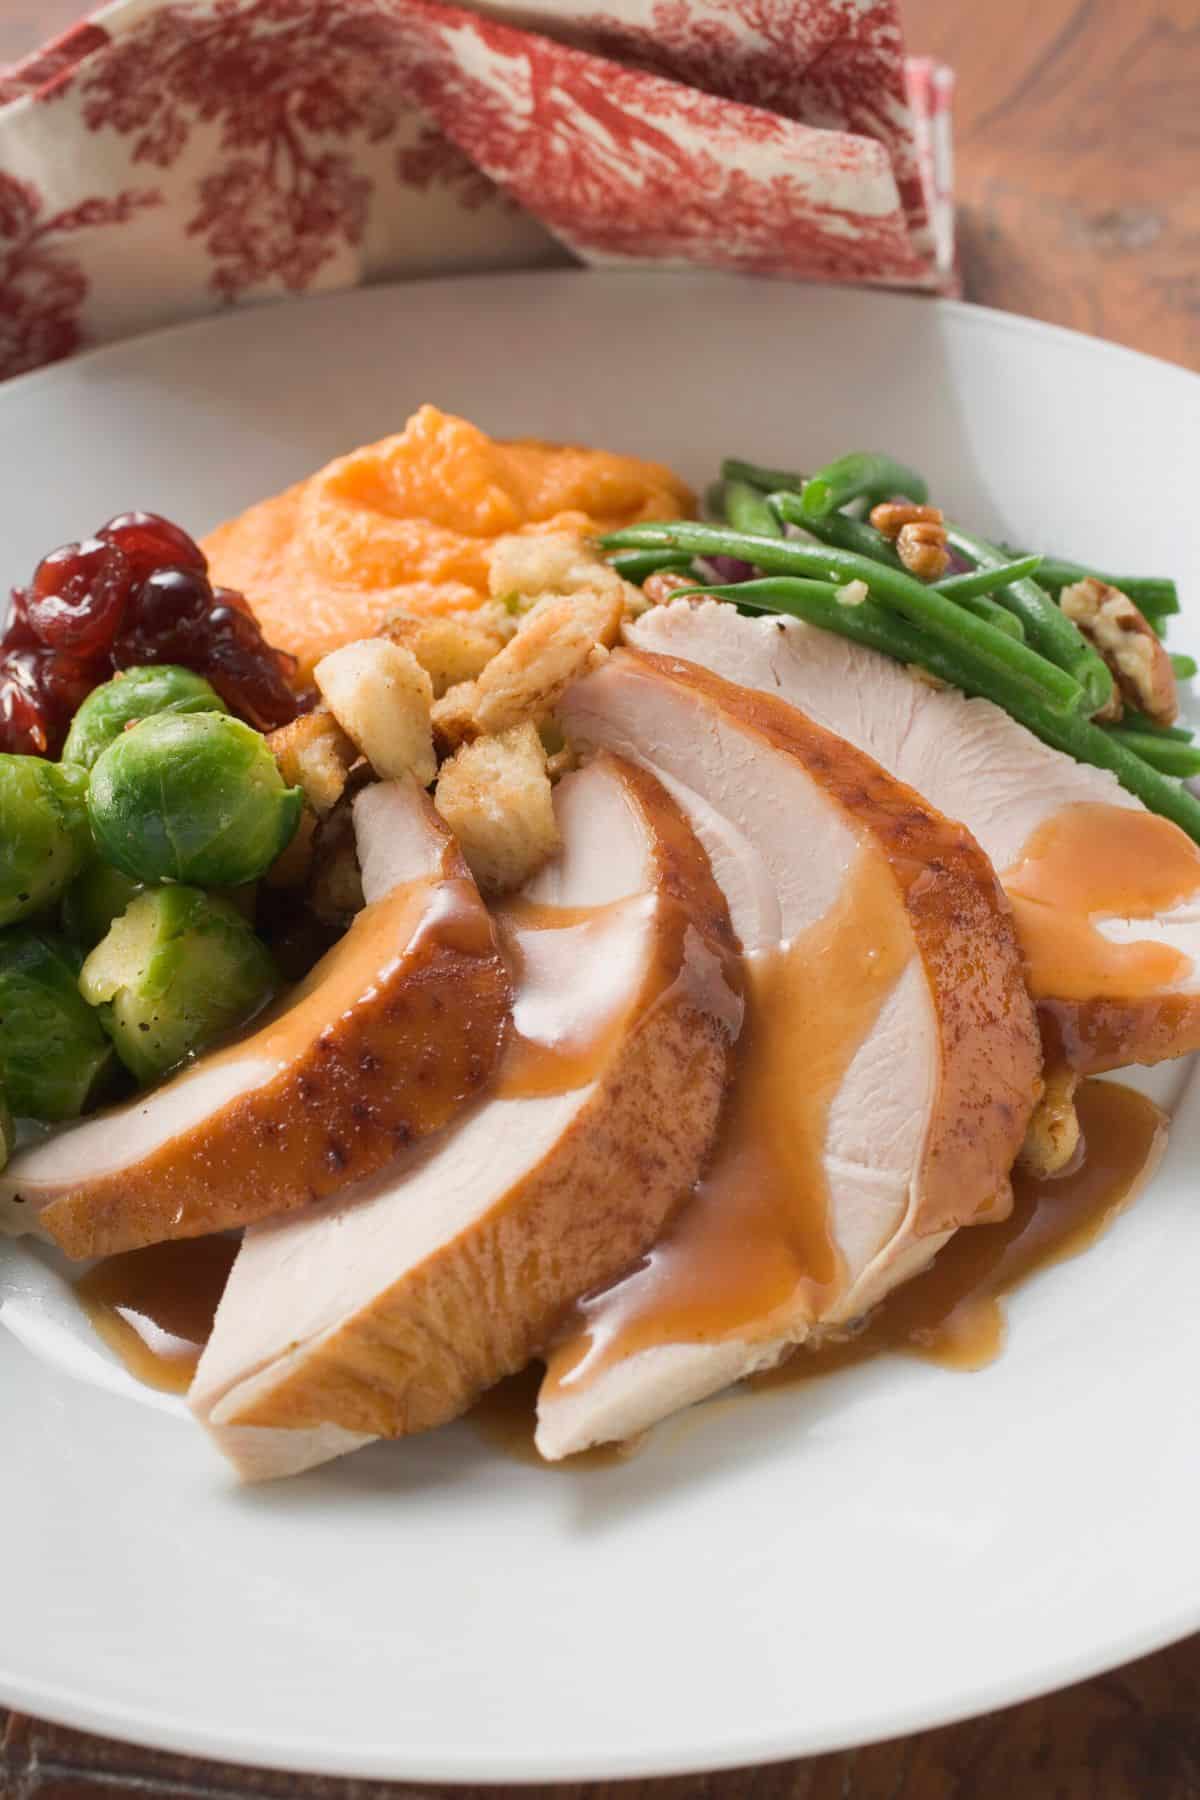 A full dinner plate of thanksgiving dinner with dairy-free gravy over turkey slices.